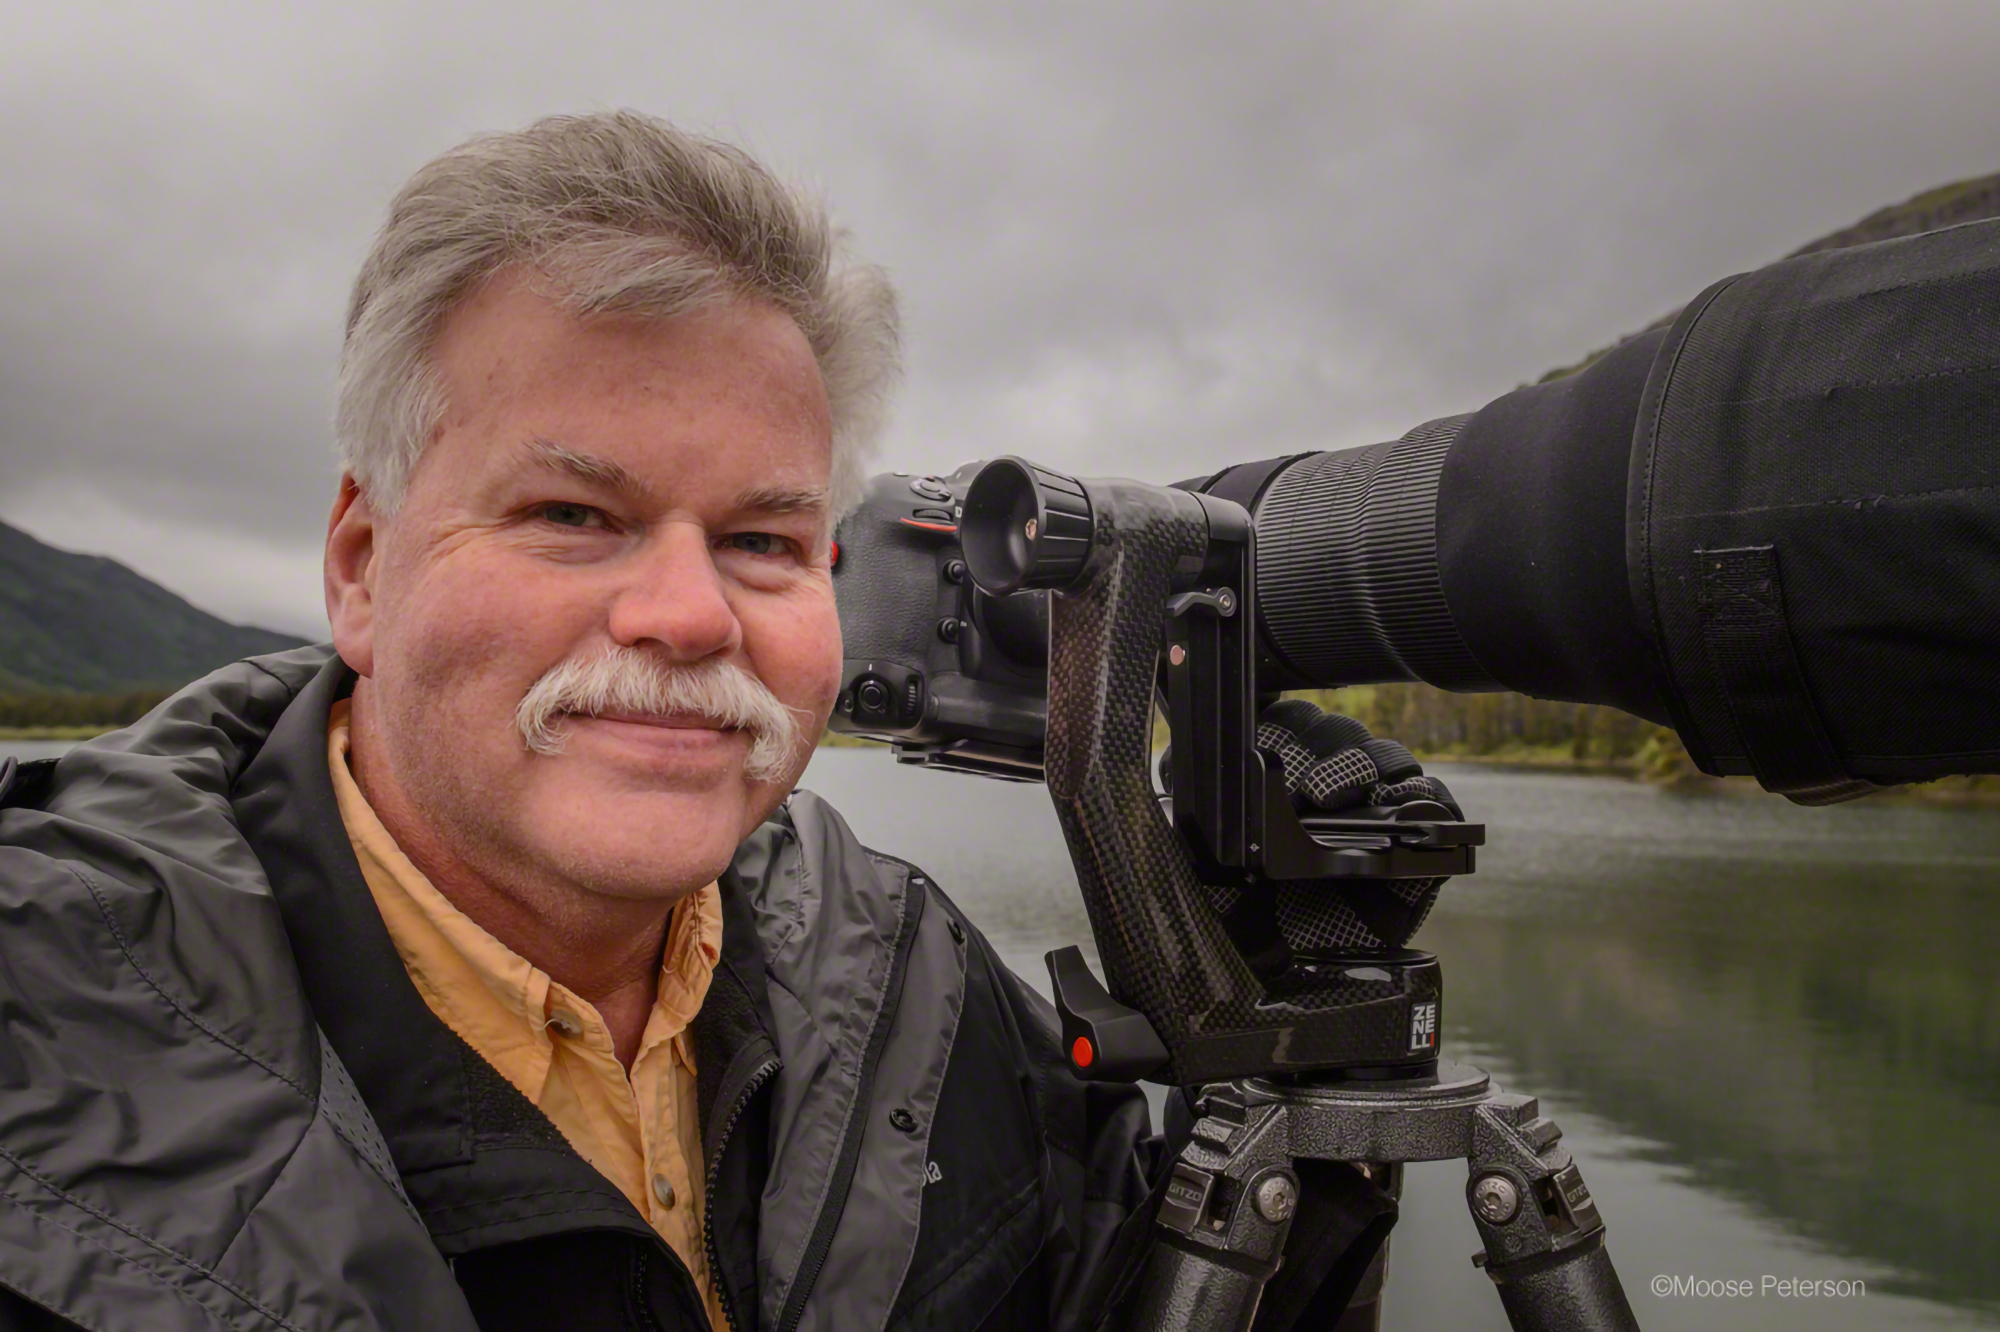 Moose Peterson has traveled the world for 40 years photographing birds and other wildlife. He will host a lecture in Palm Coast on Feb. 10. Photo courtesy of Cindi Lane